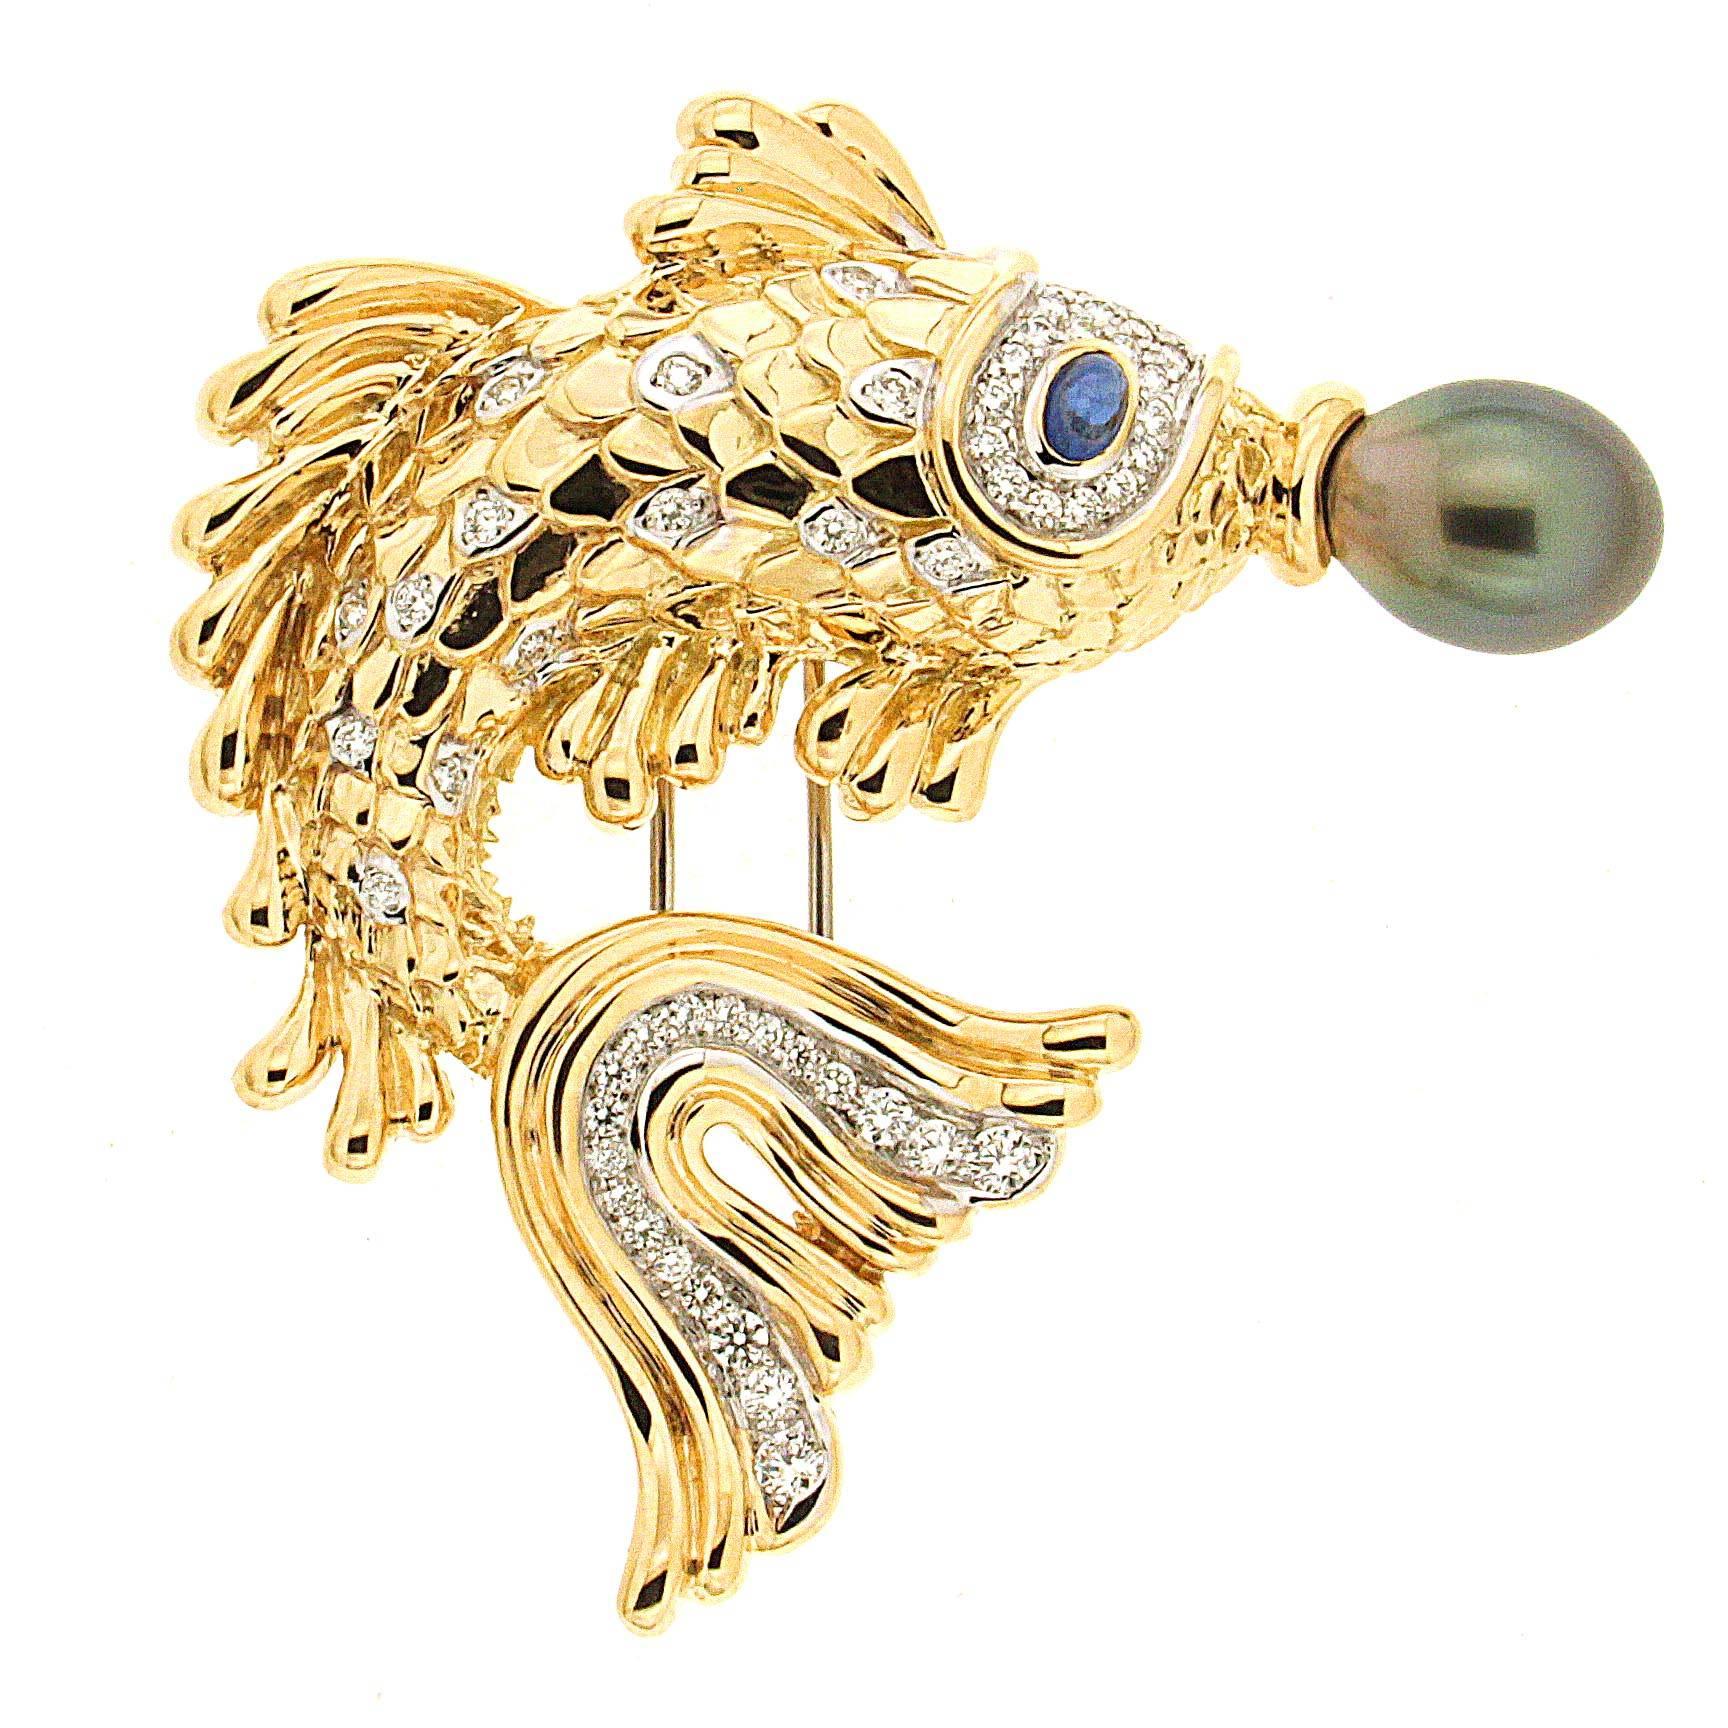 Valentin Magro Fish Brooch Pescado del Orient with Sapphire and Tahitian Pearl